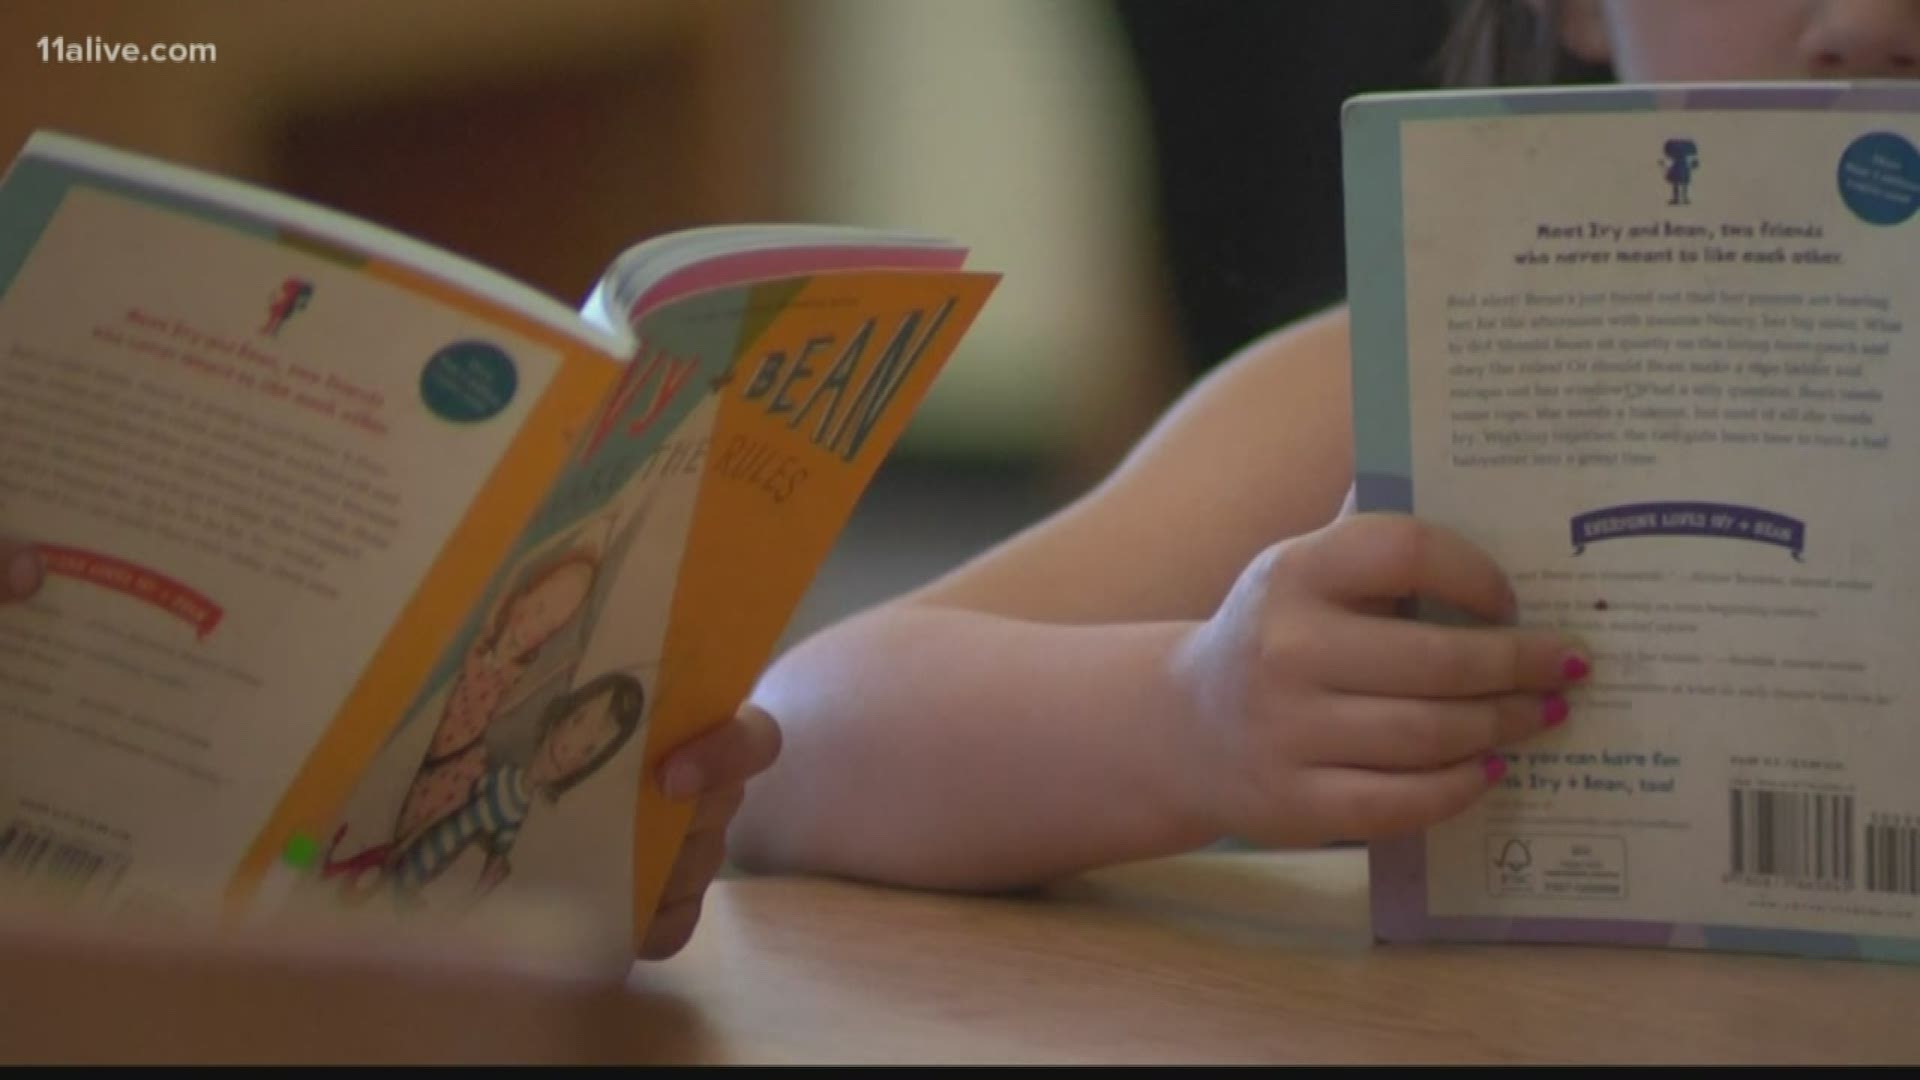 People who have struggled with Dyslexia say this is going to make a huge difference.